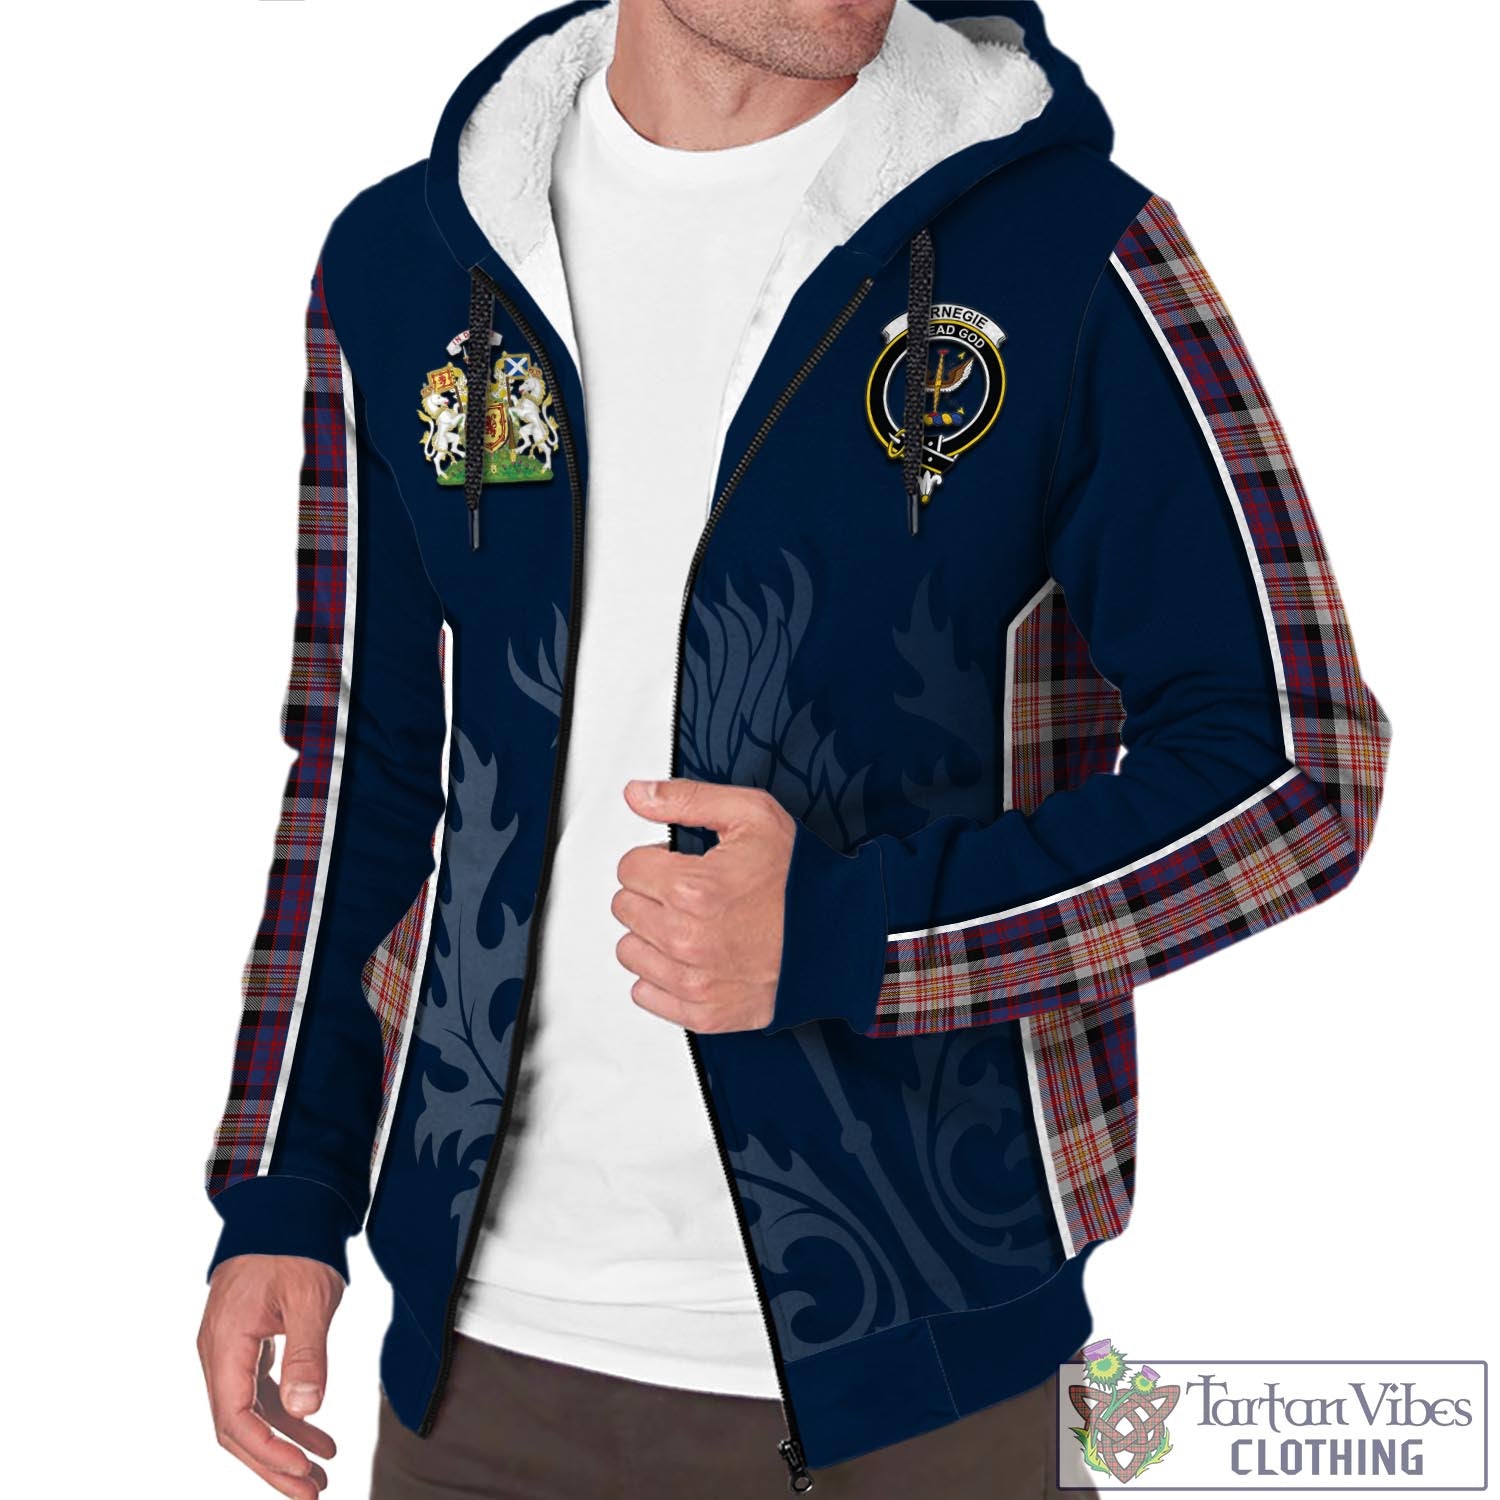 Tartan Vibes Clothing Carnegie Tartan Sherpa Hoodie with Family Crest and Scottish Thistle Vibes Sport Style